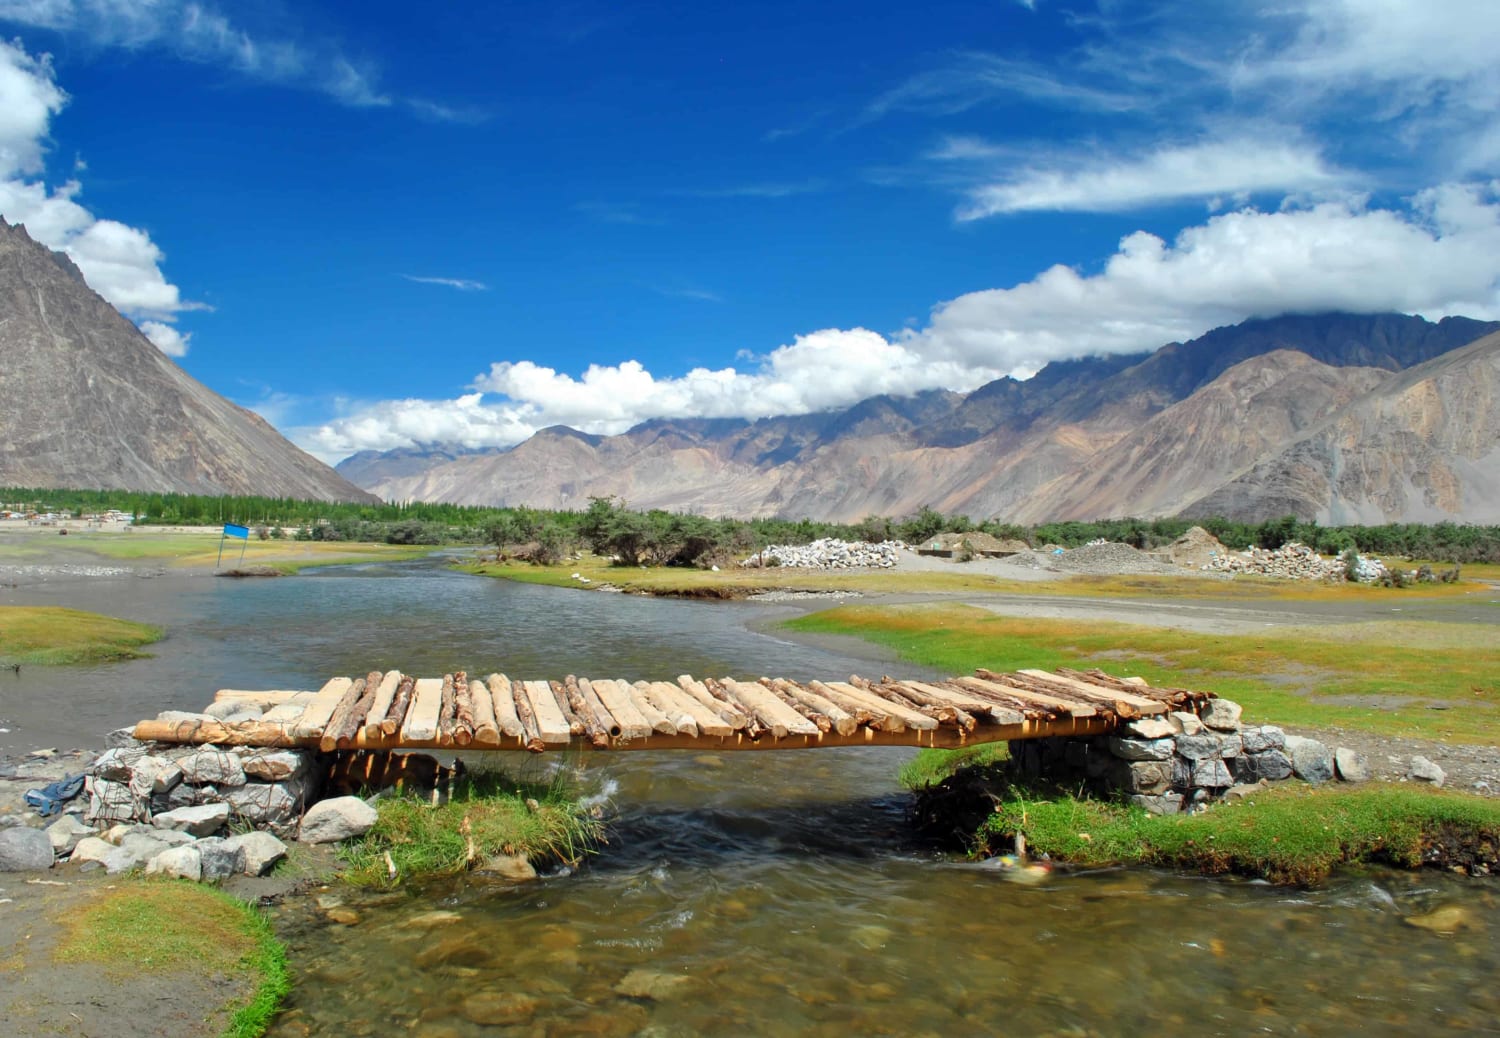 7 Things to Consider for a Ladakh Trip